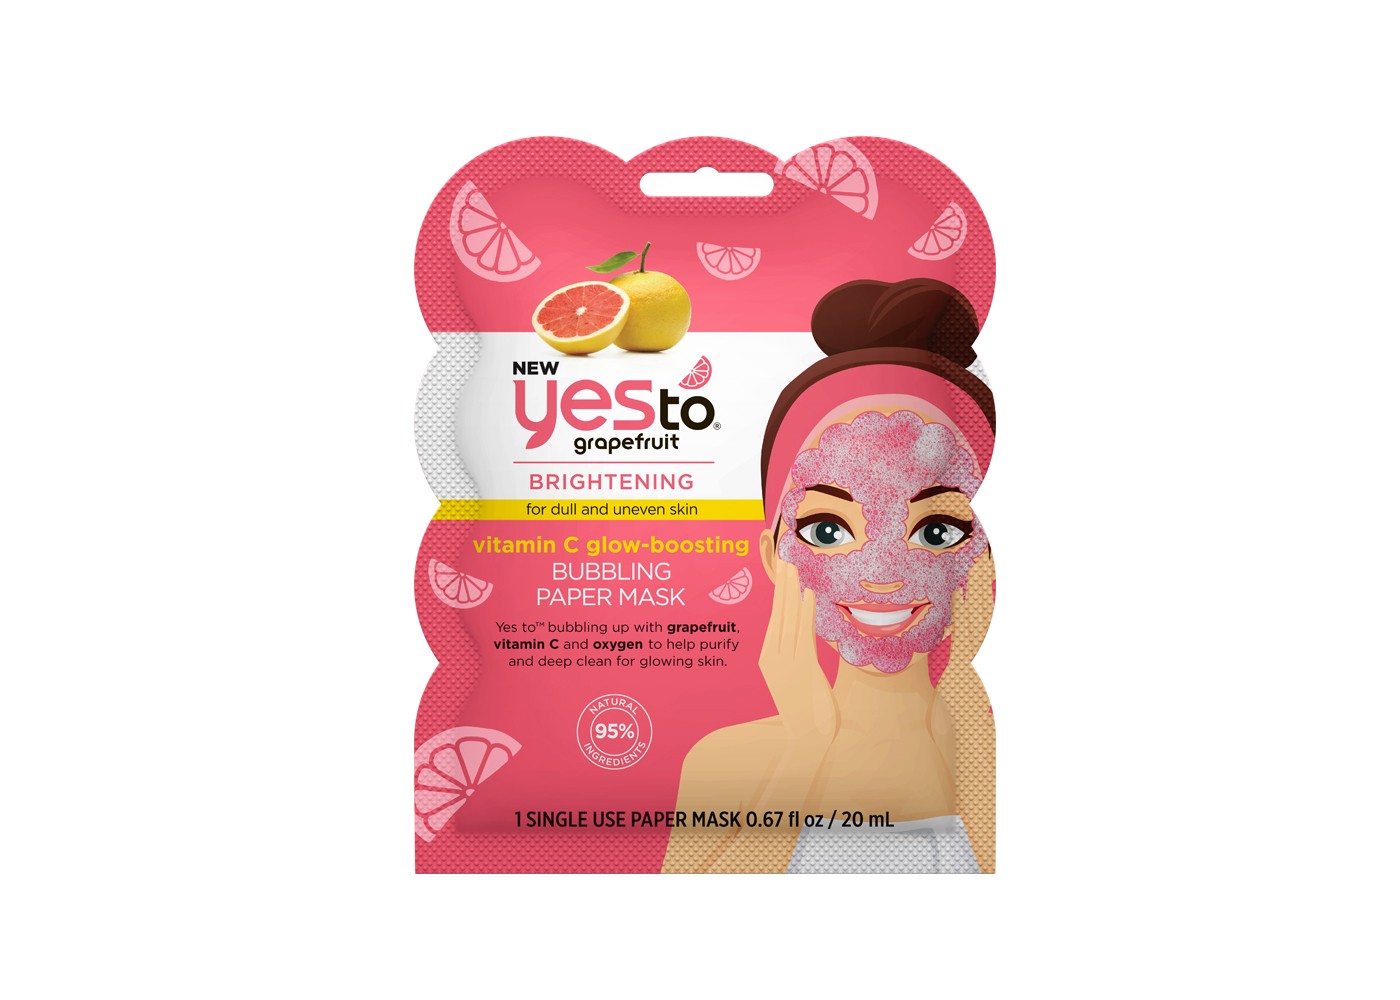 Yes To Grapefruit Vitamin C Glow Boosting Bubbling Paper Mask Single Use Facial Treatment - image 1 of 3